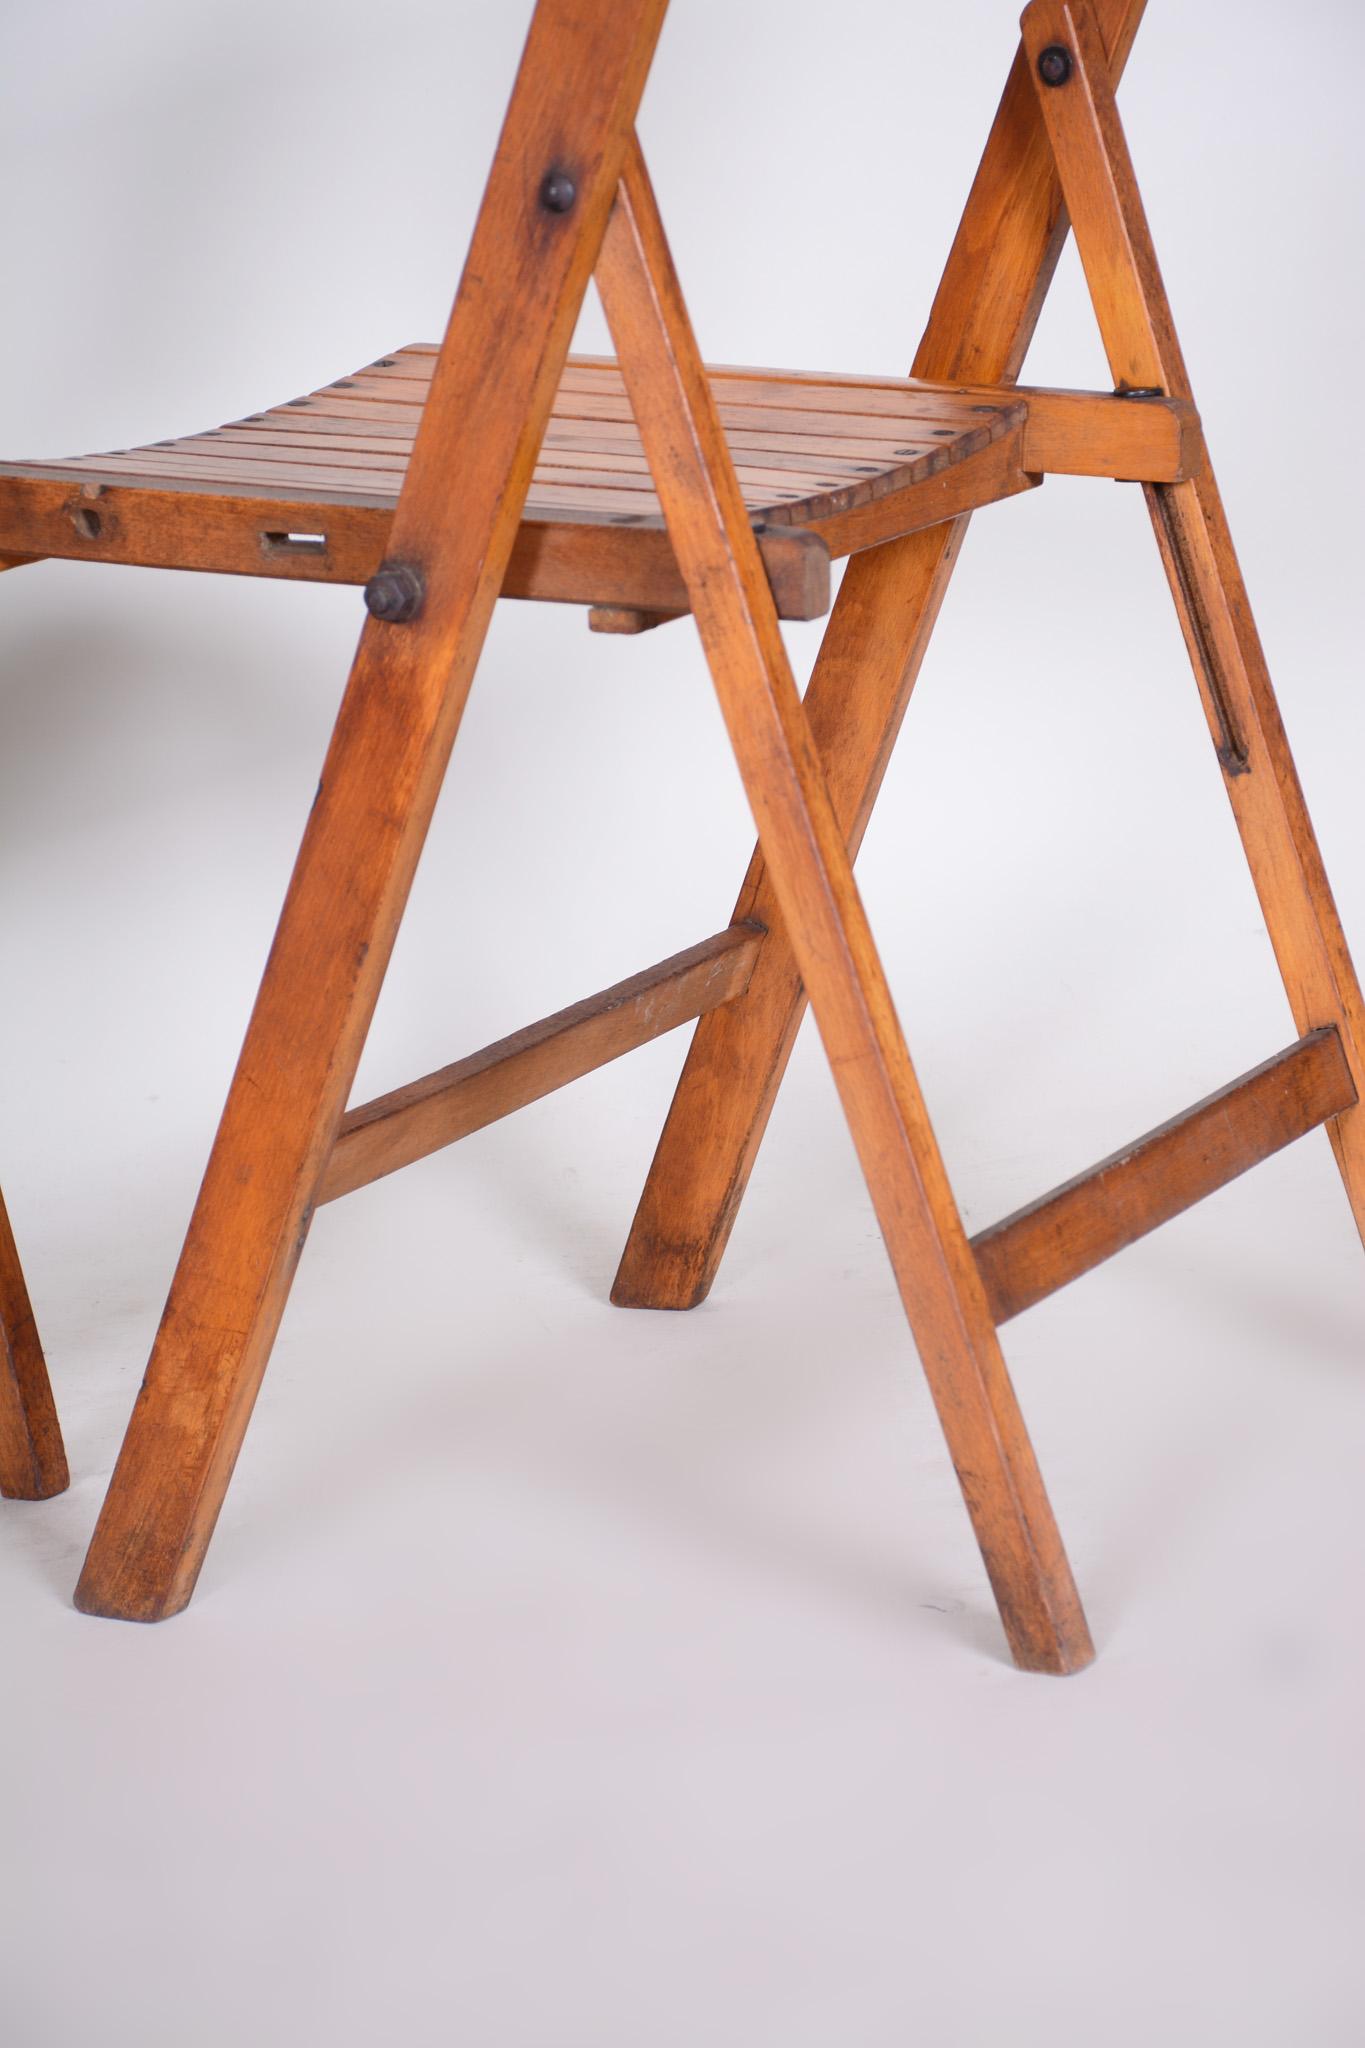 20th Century Beech Midcentury Chairs, 3 Pieces, 1950s, Well Preserved Condition For Sale